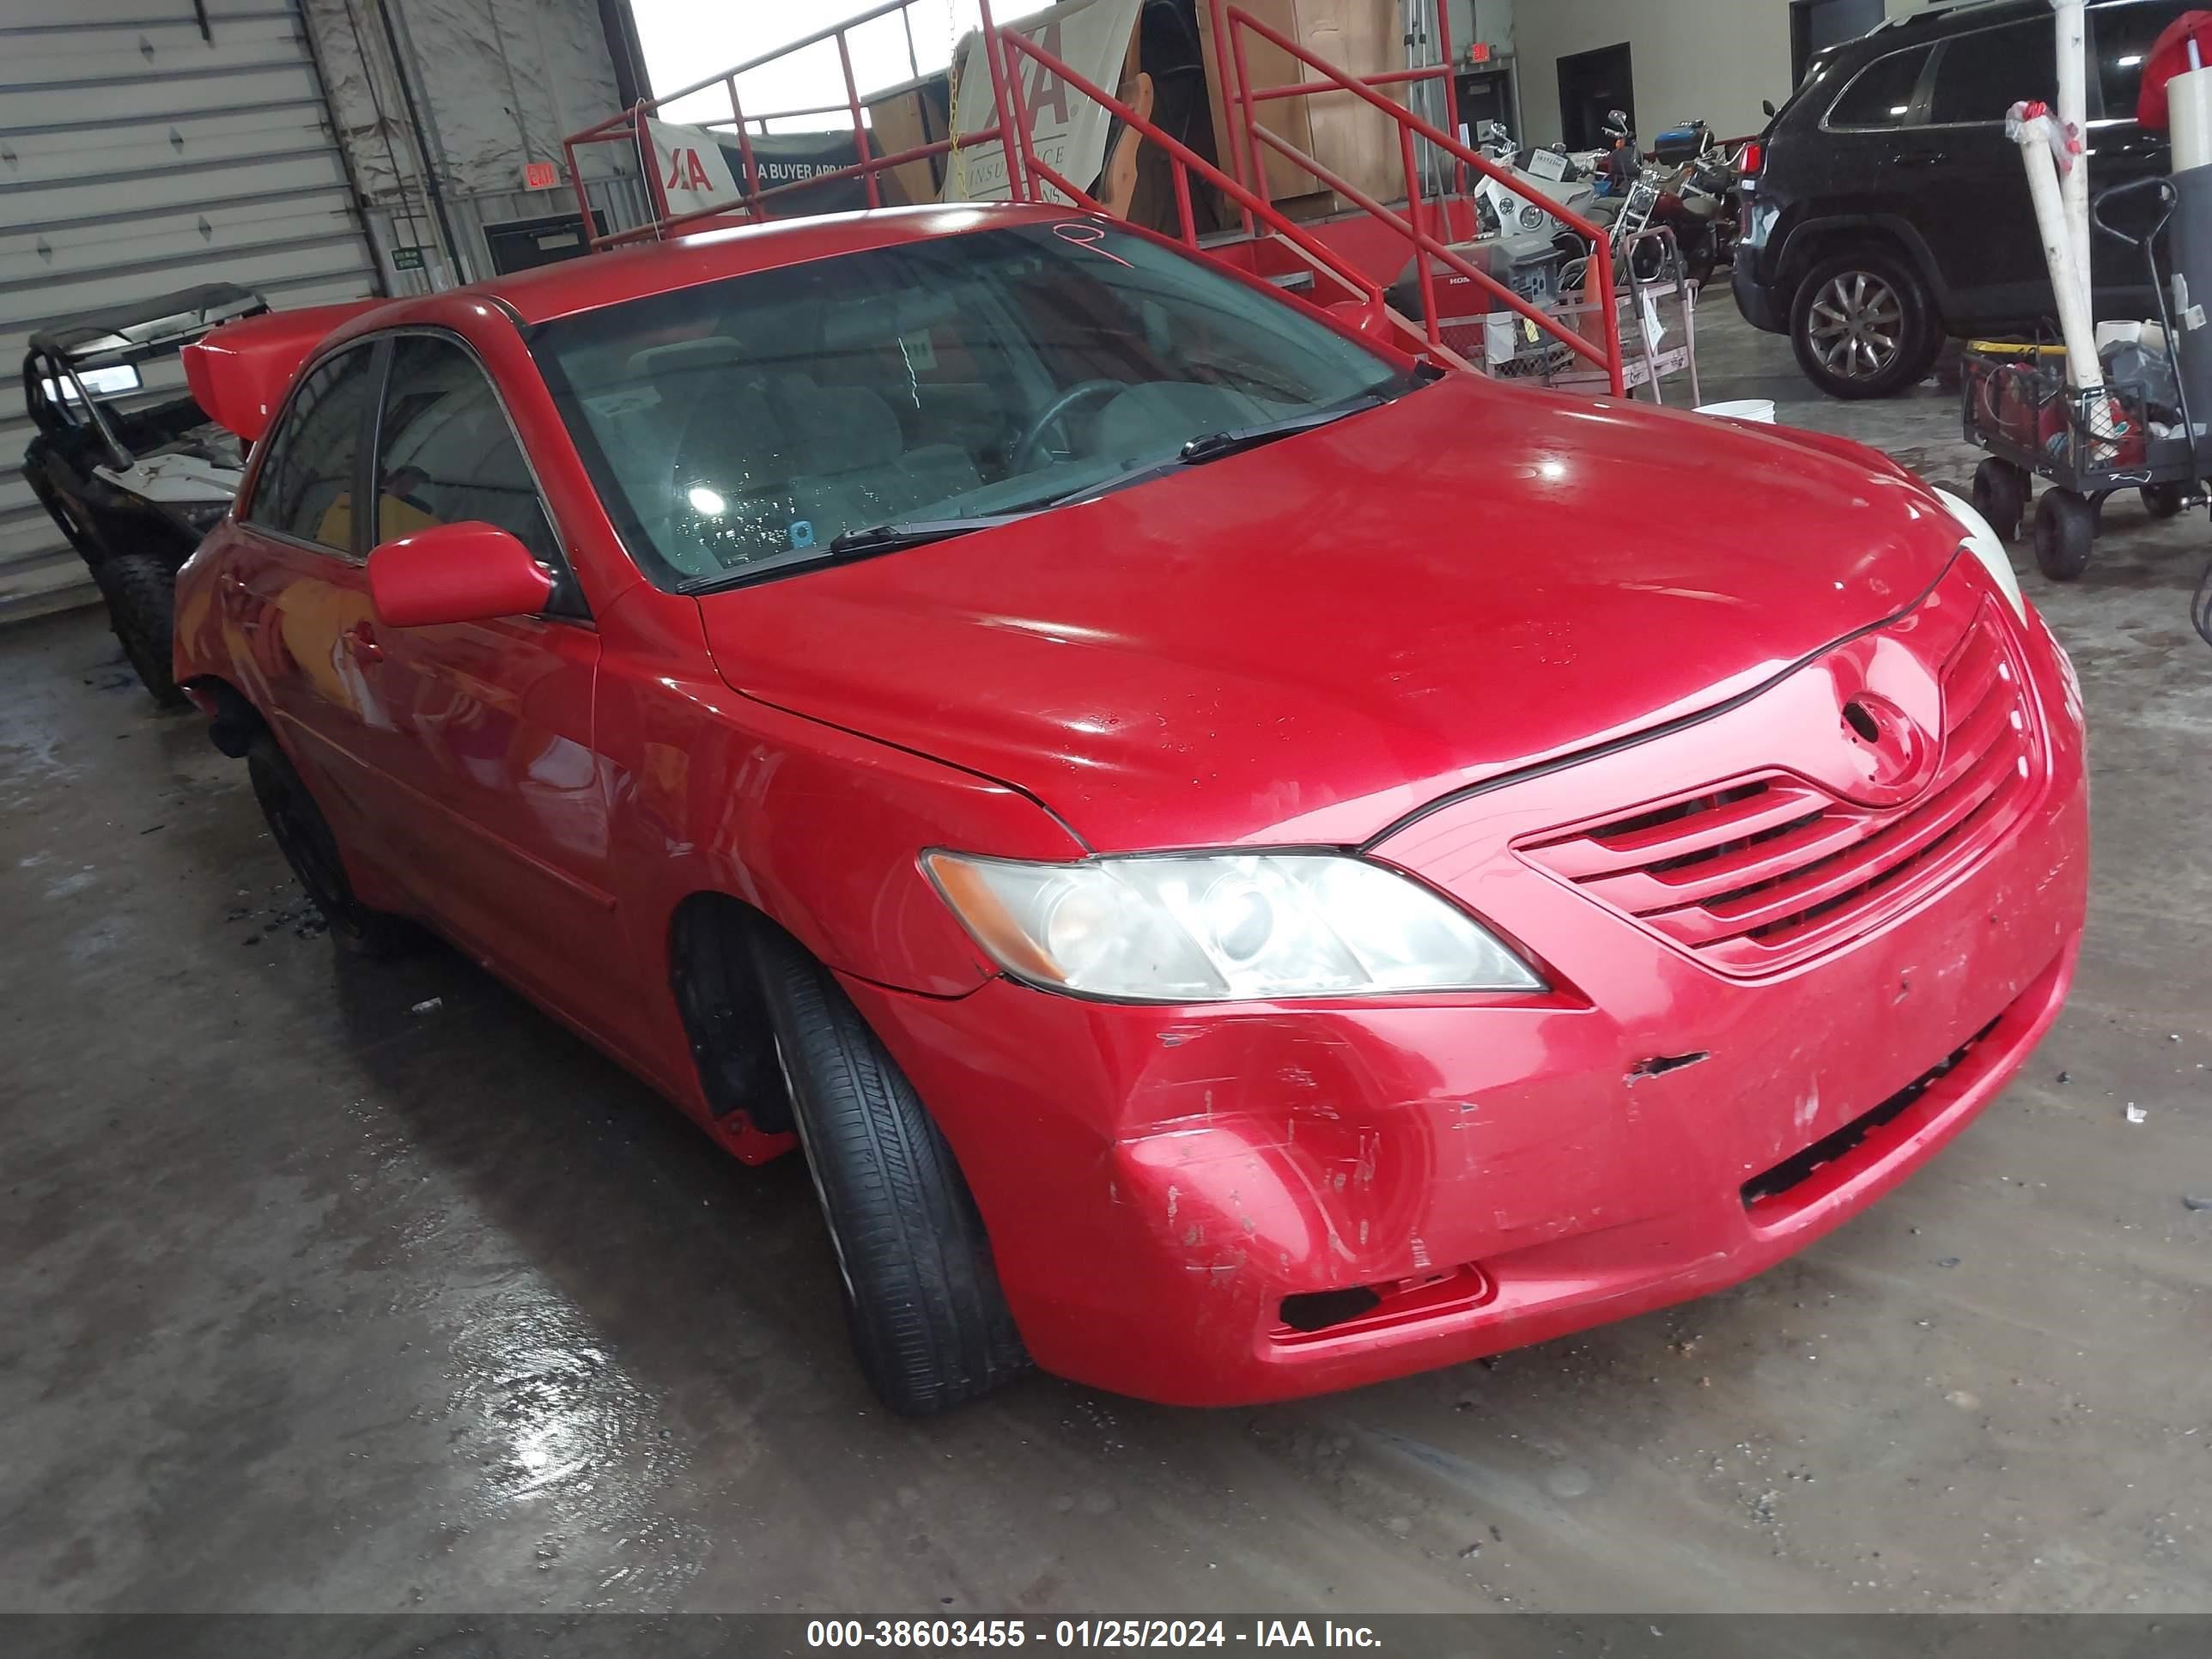 VIN: 4T4BE46K29R105155 - toyota camry